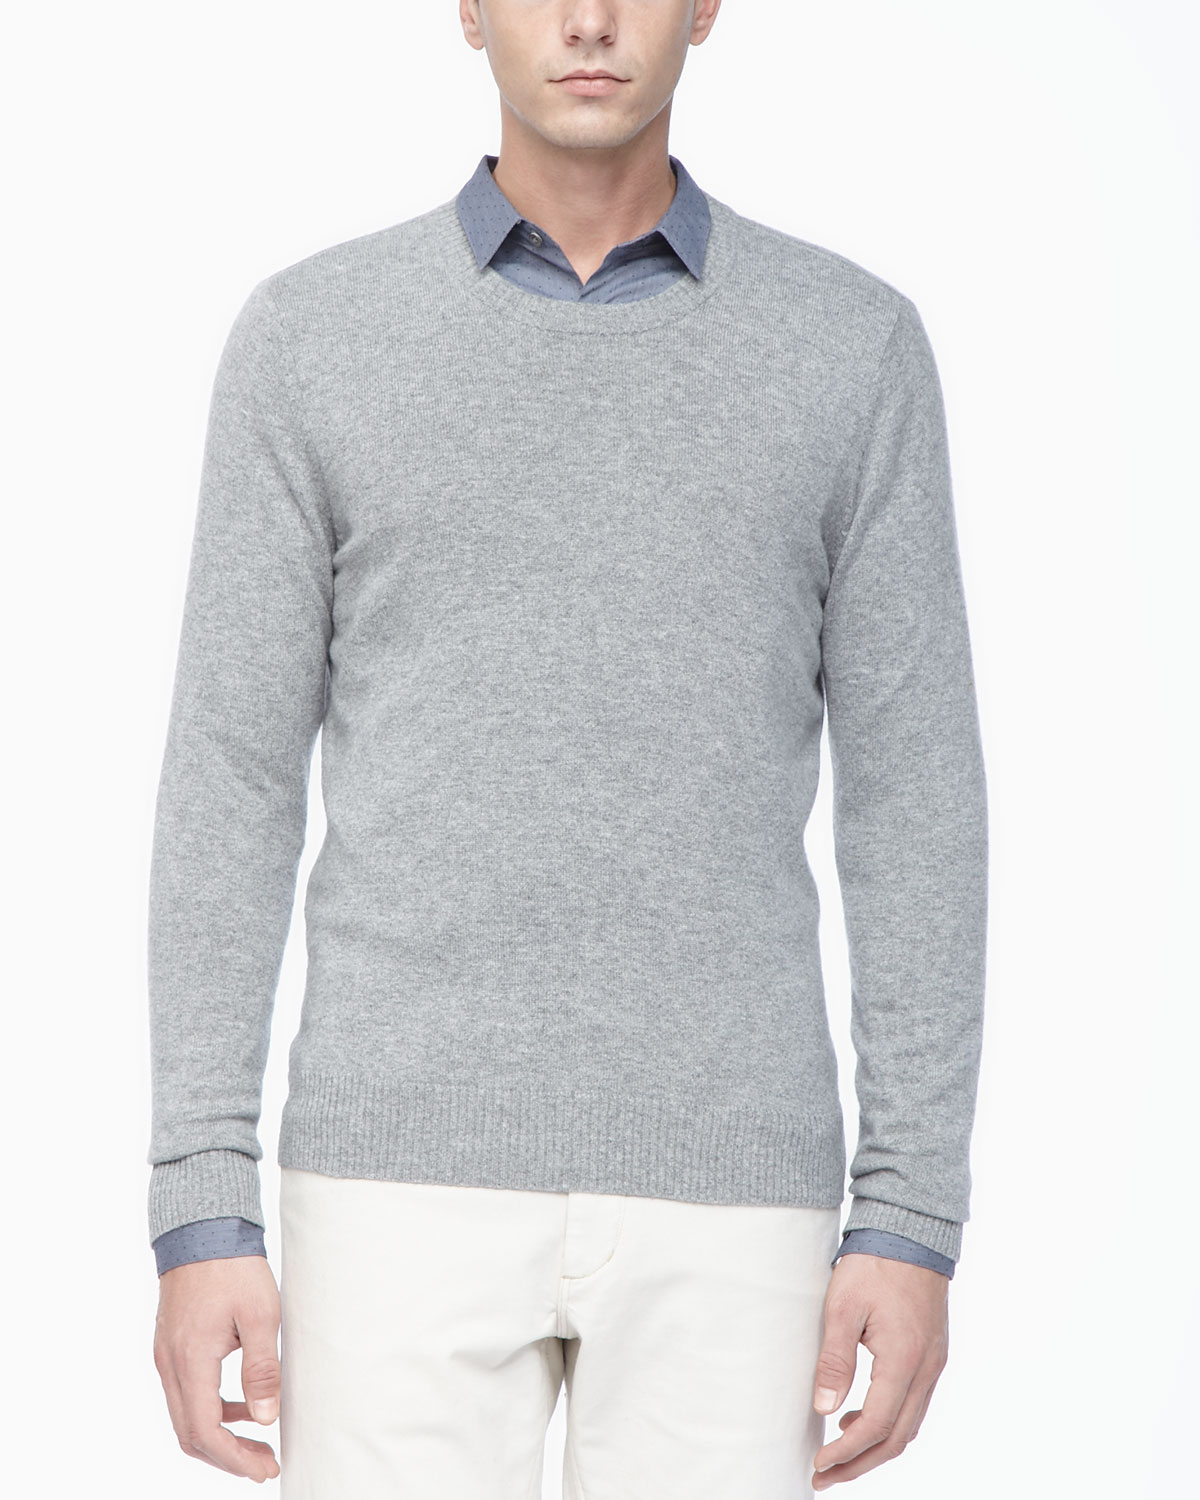 Lyst - Theory Crew Neckline Cashmere Sweater in Gray for Men